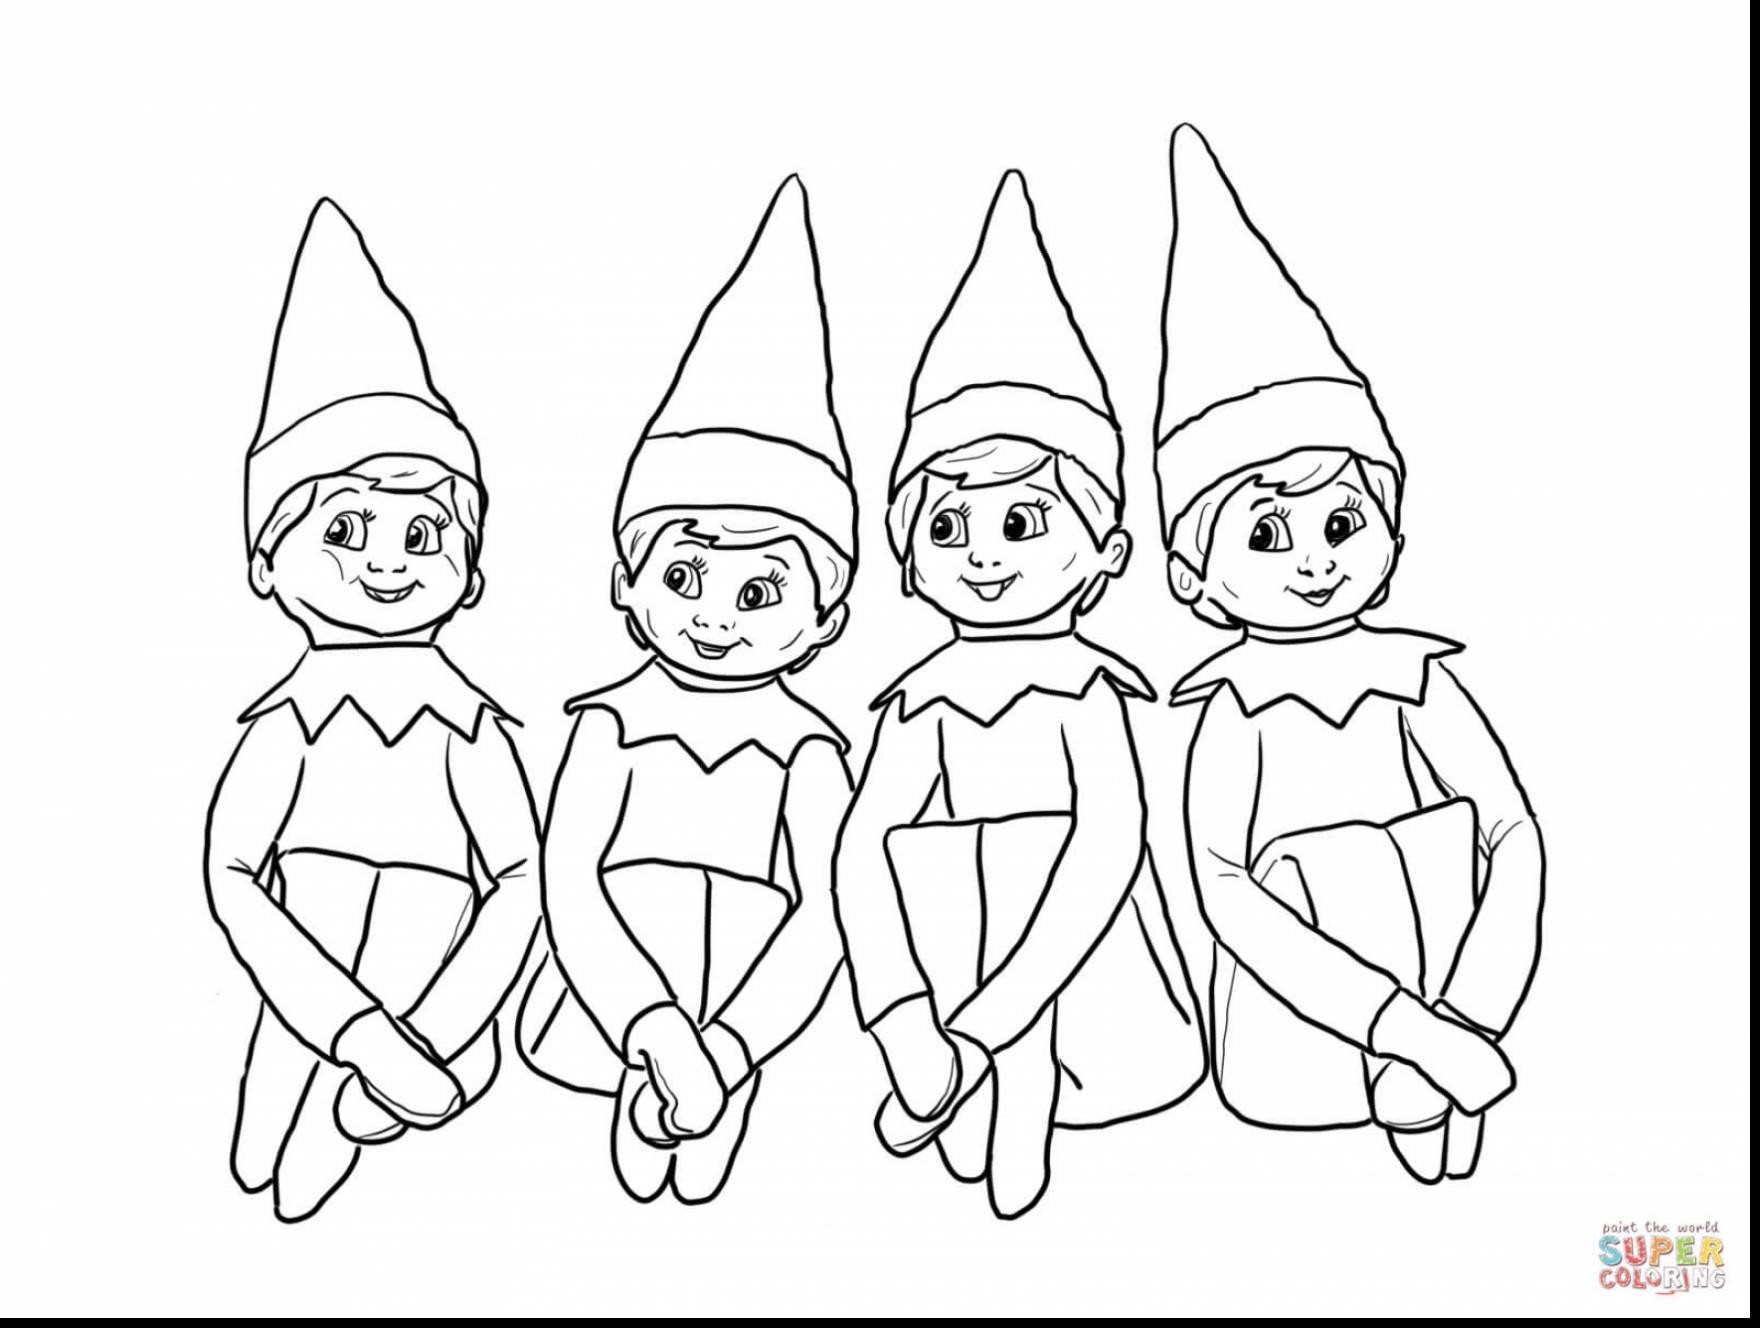 buddy-the-elf-drawing-at-getdrawings-free-download